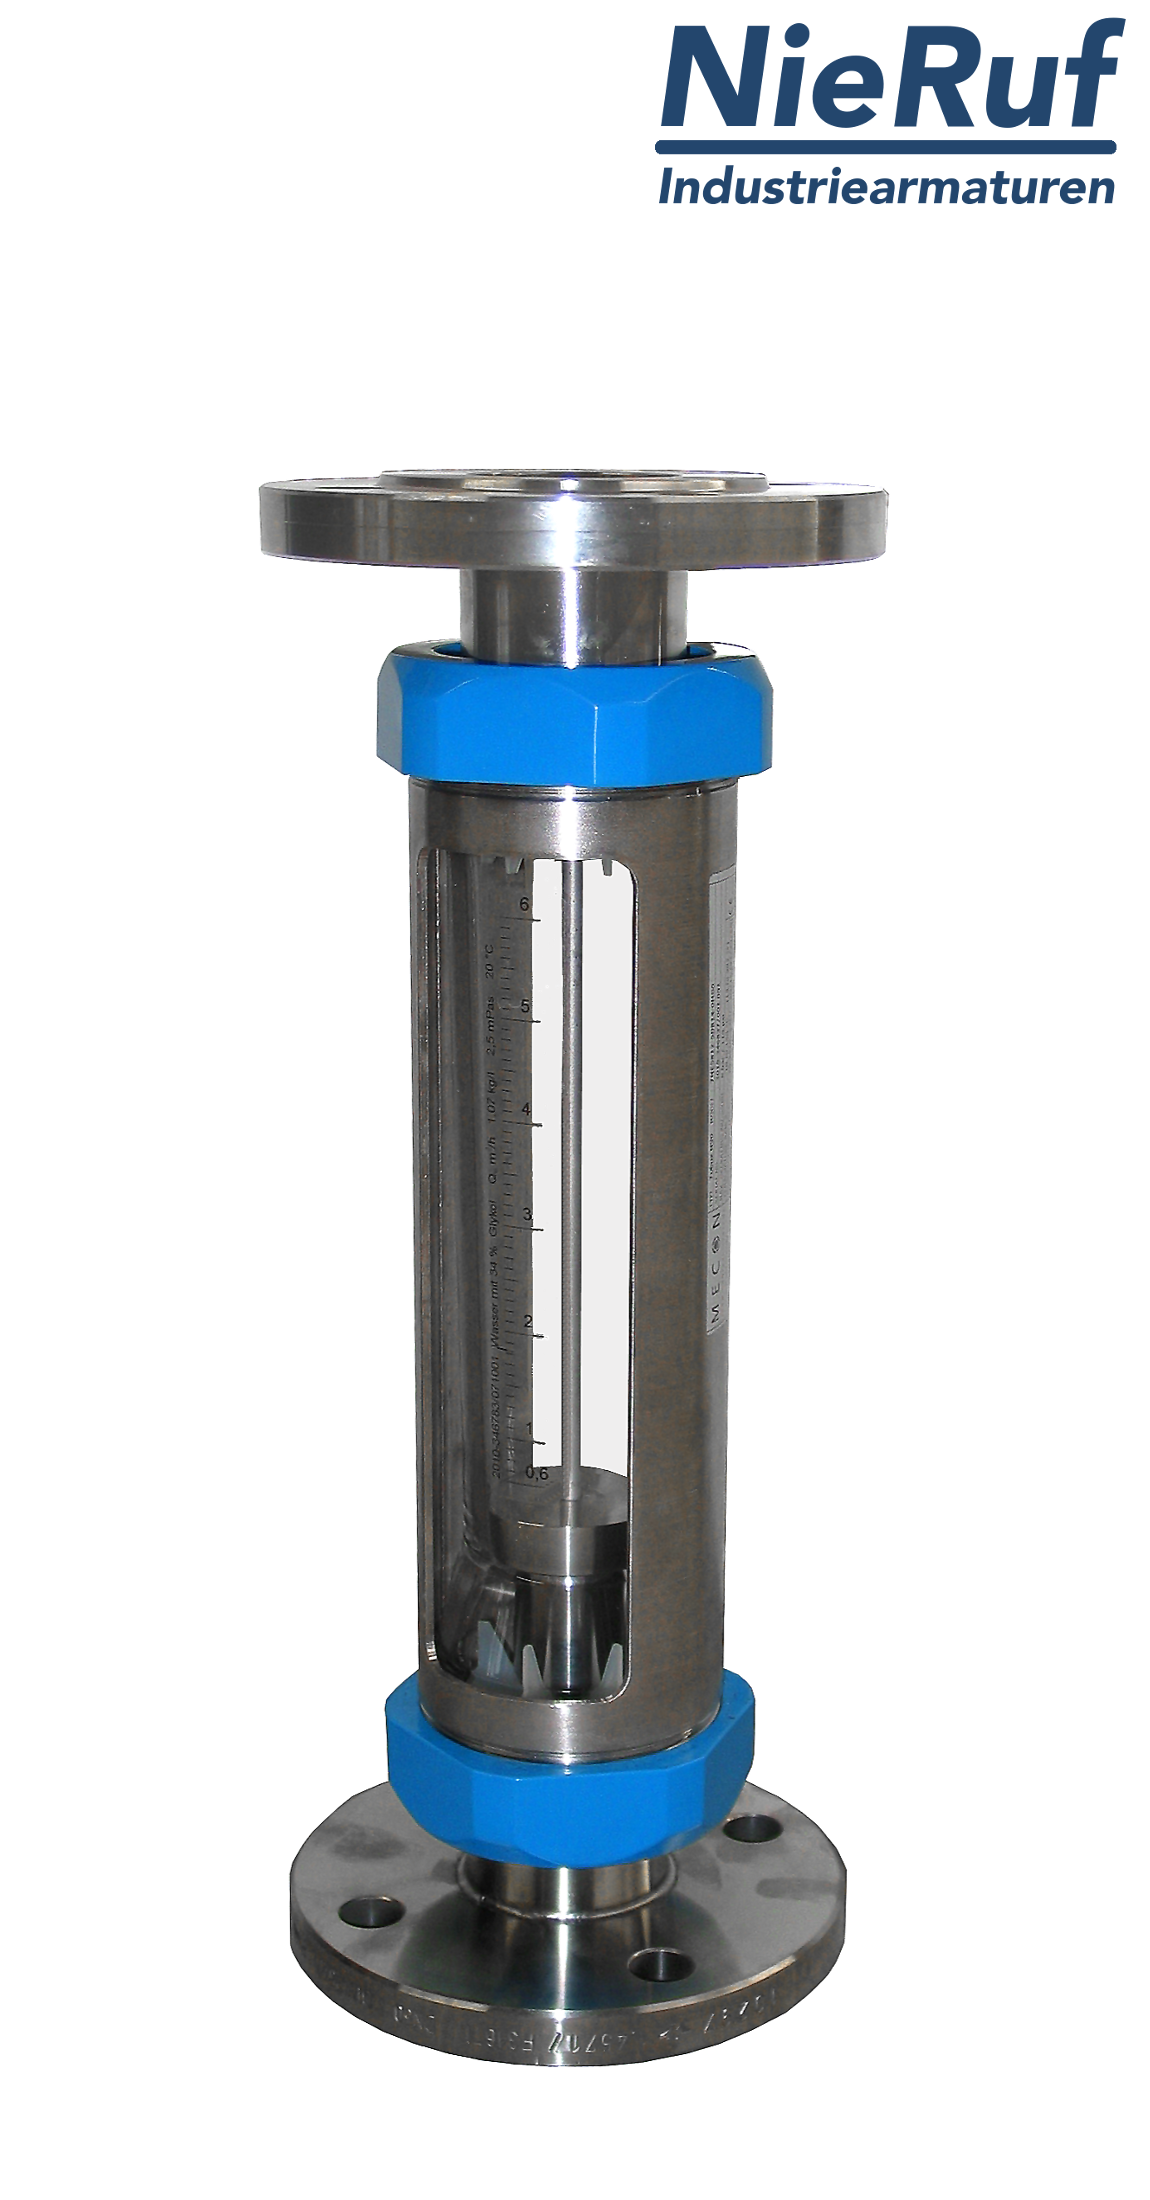 Variable area flowmeter stainless steel + borosilicate flange DN25 1.6 - 16.0 l/h water FKM